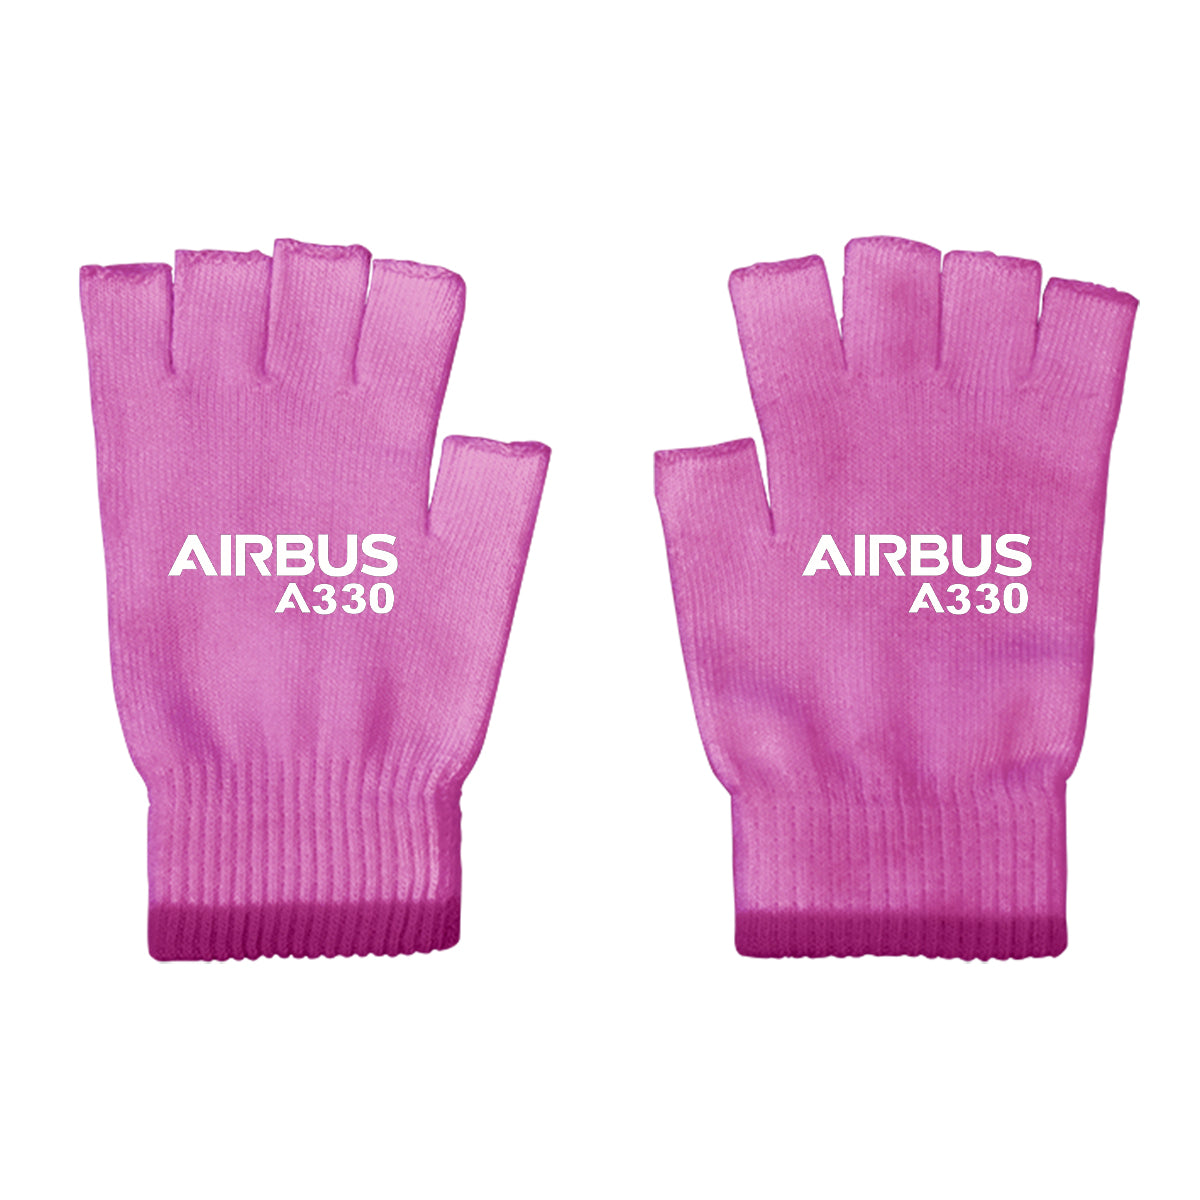 Airbus A330 & Text Designed Cut Gloves